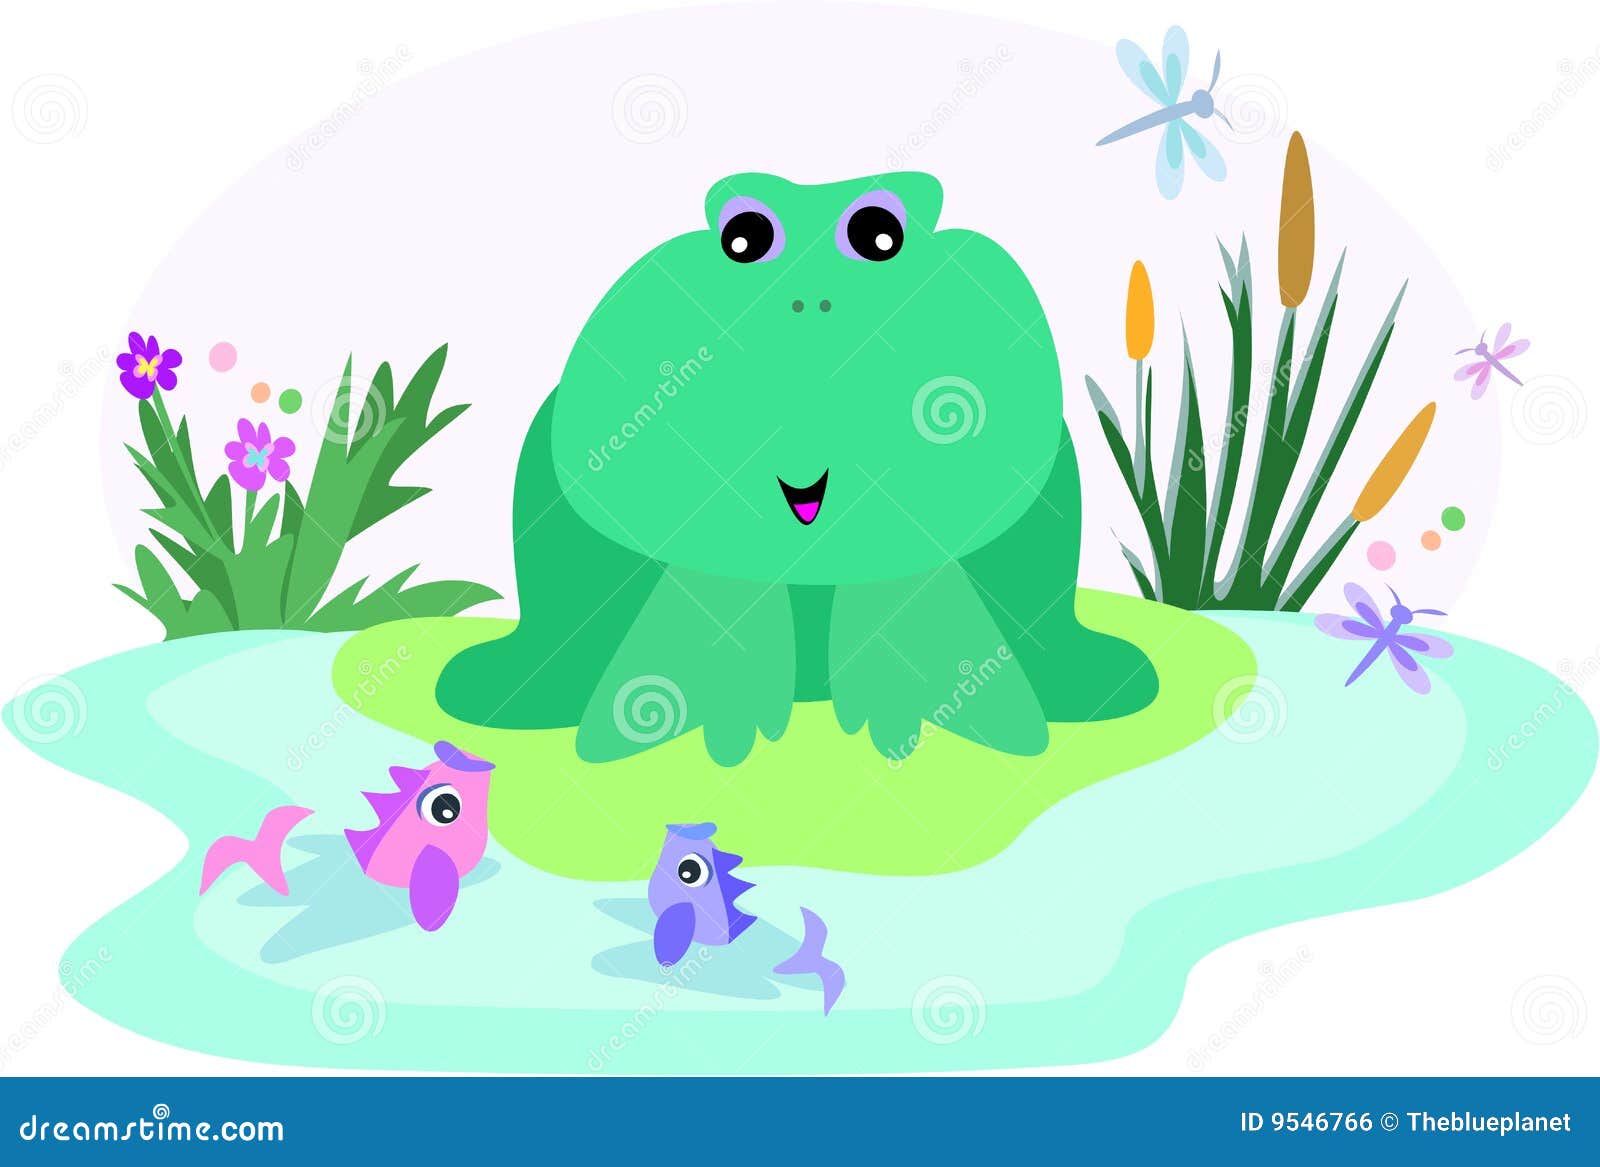 Frog in a Fish Pond stock vector. Illustration of fish - 9546766